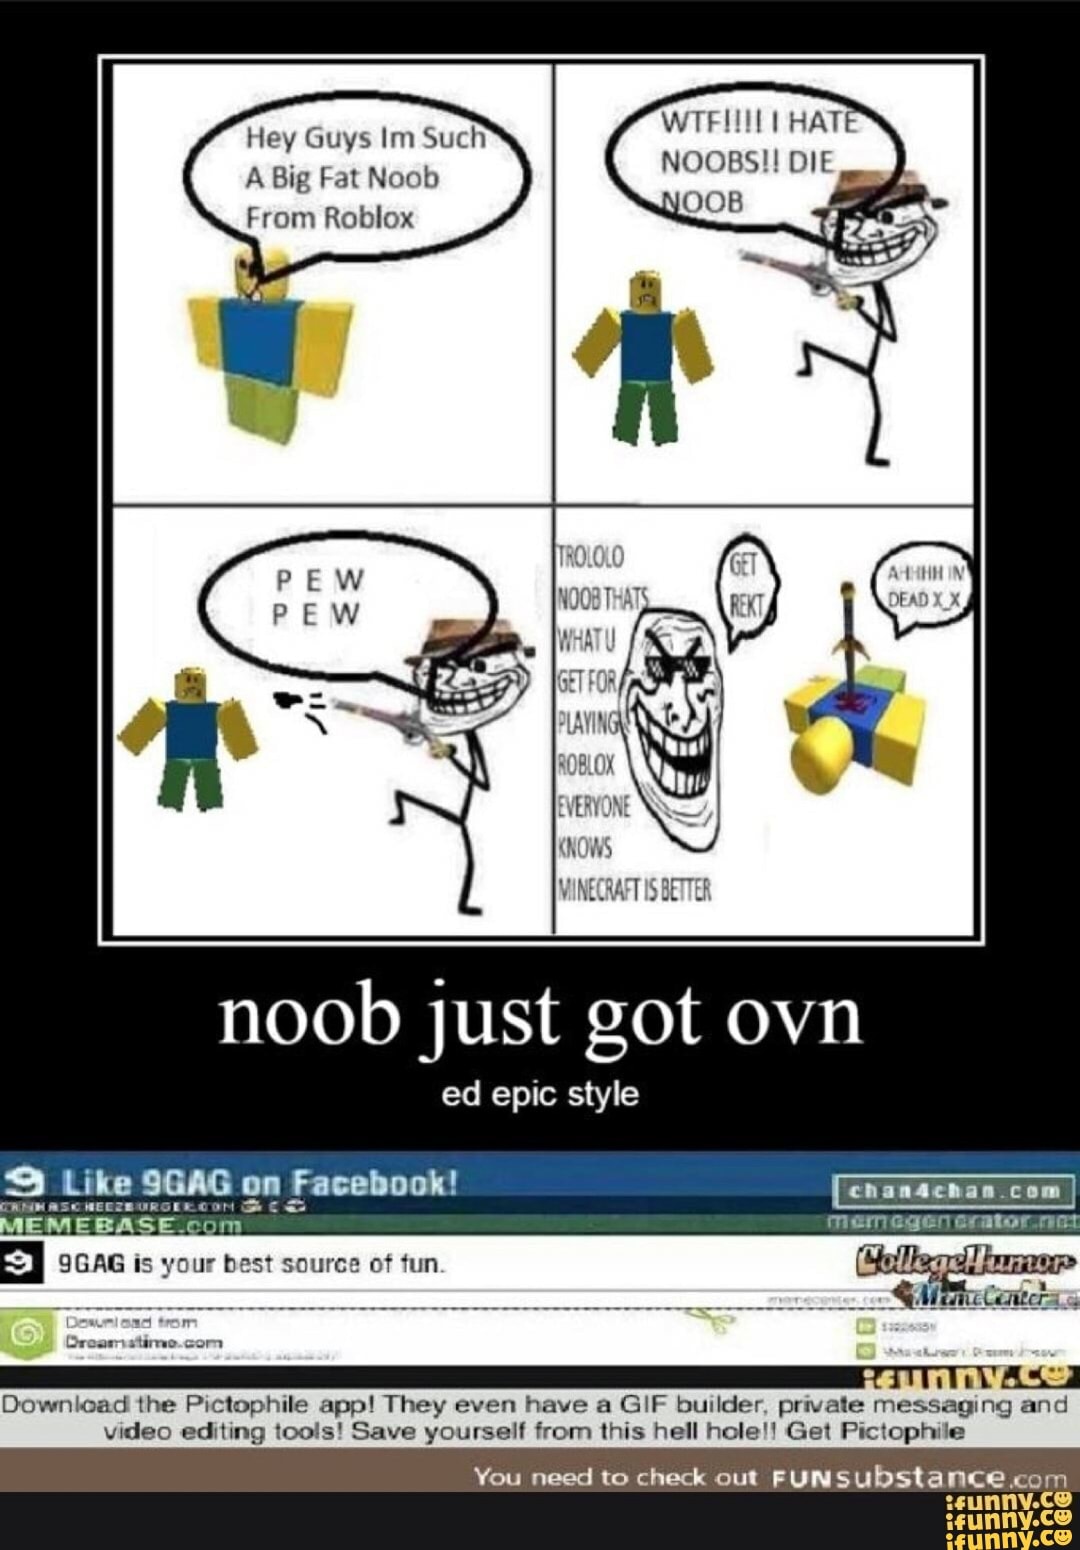 Hey Guys Im Such A Big Fat Noob From Roblox Noob Just Got Ovn I N Mi Download The Plclophile App They Even Have A Gif Bwlder Pnvale Messaging And Wdeo Editing - fat noob roblox